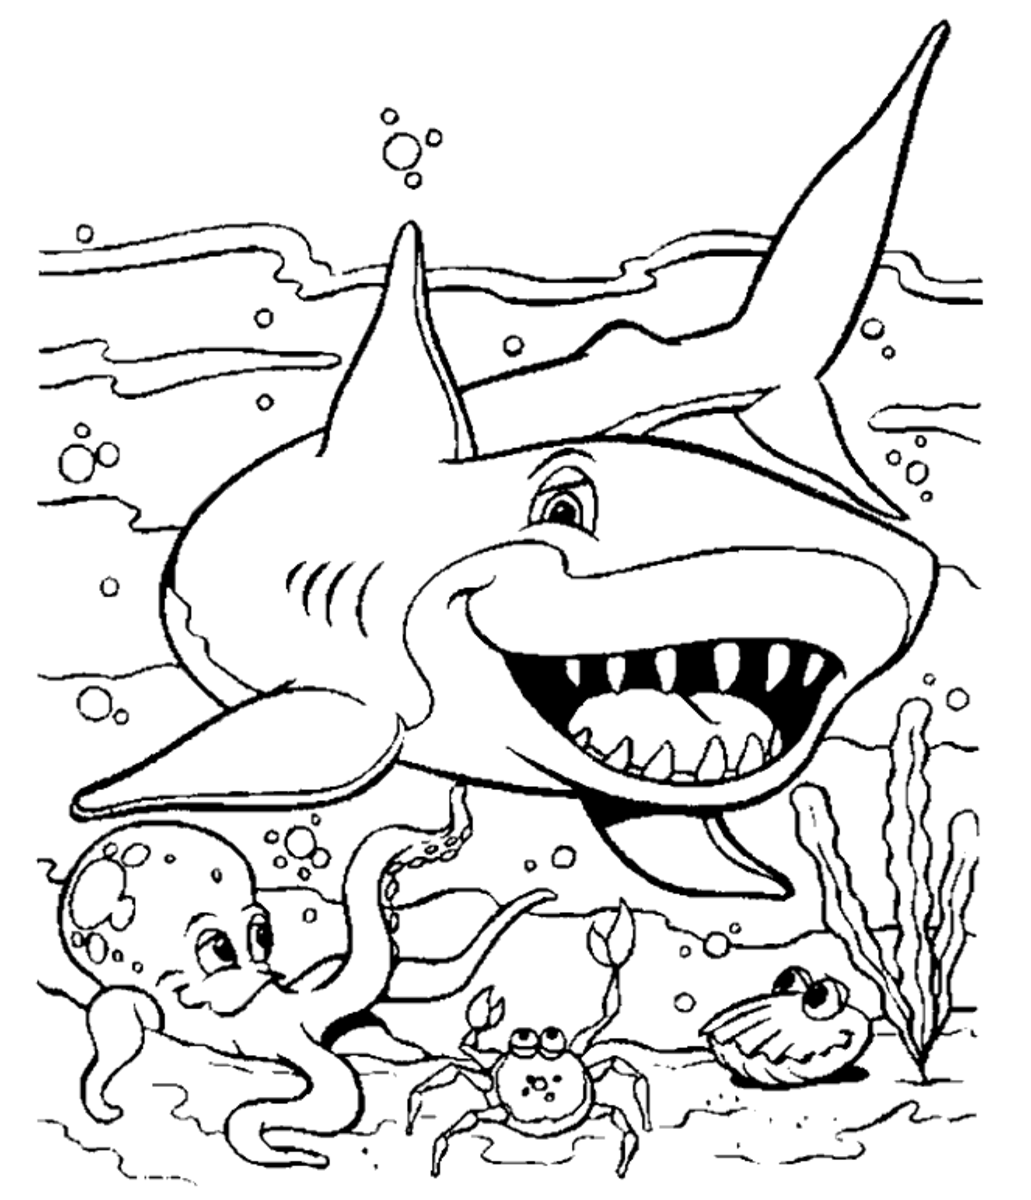 Pictures of Sharks for Kids to Color In